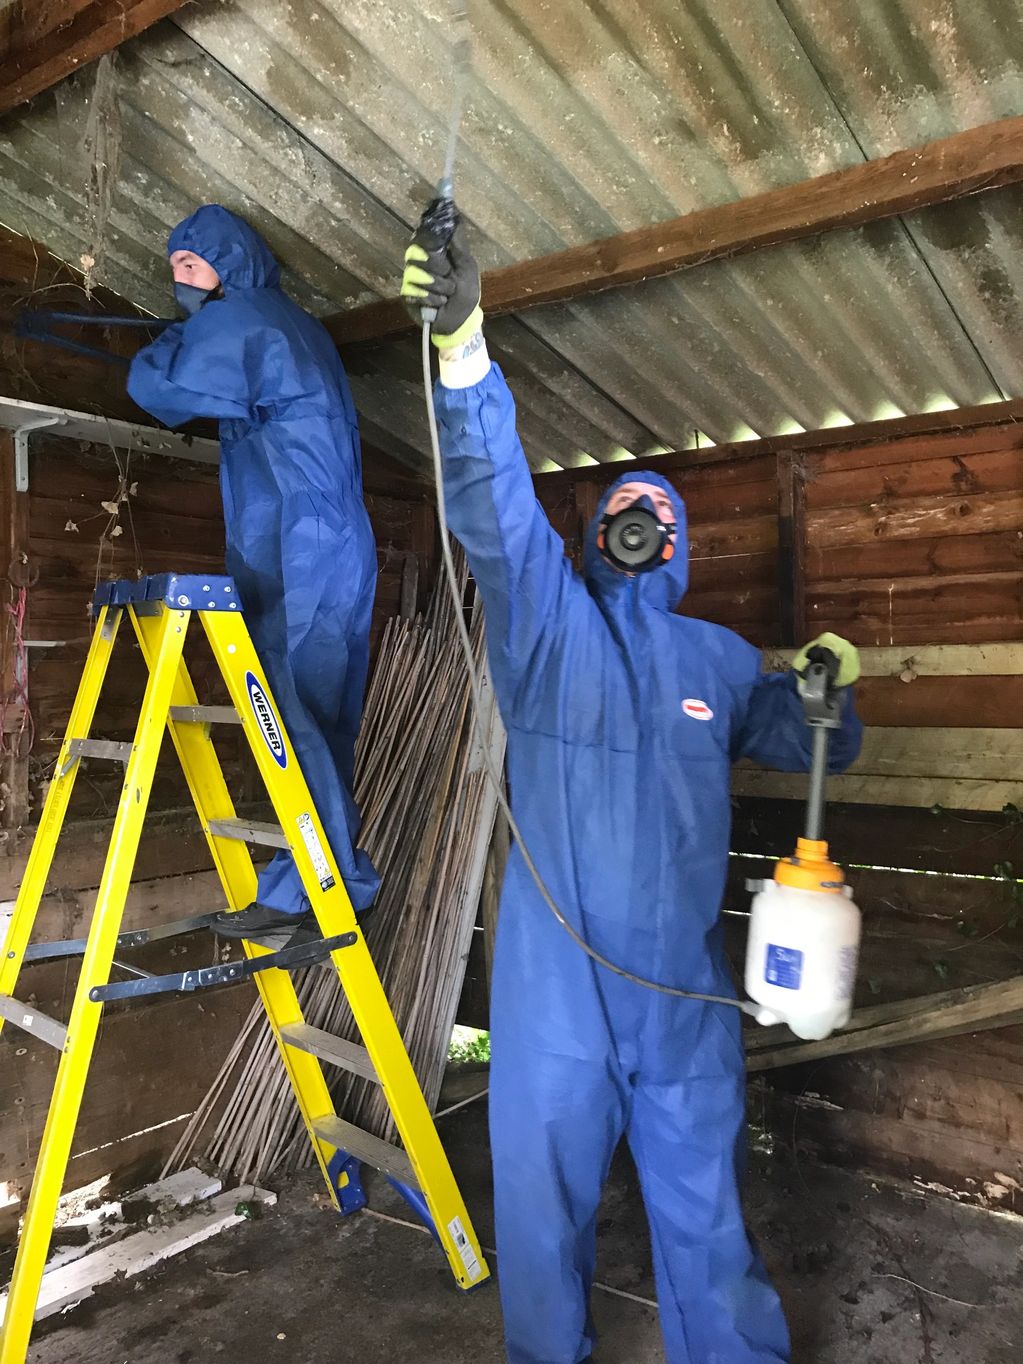 Spraying down asbestos cement roof sheets prior to removal works.